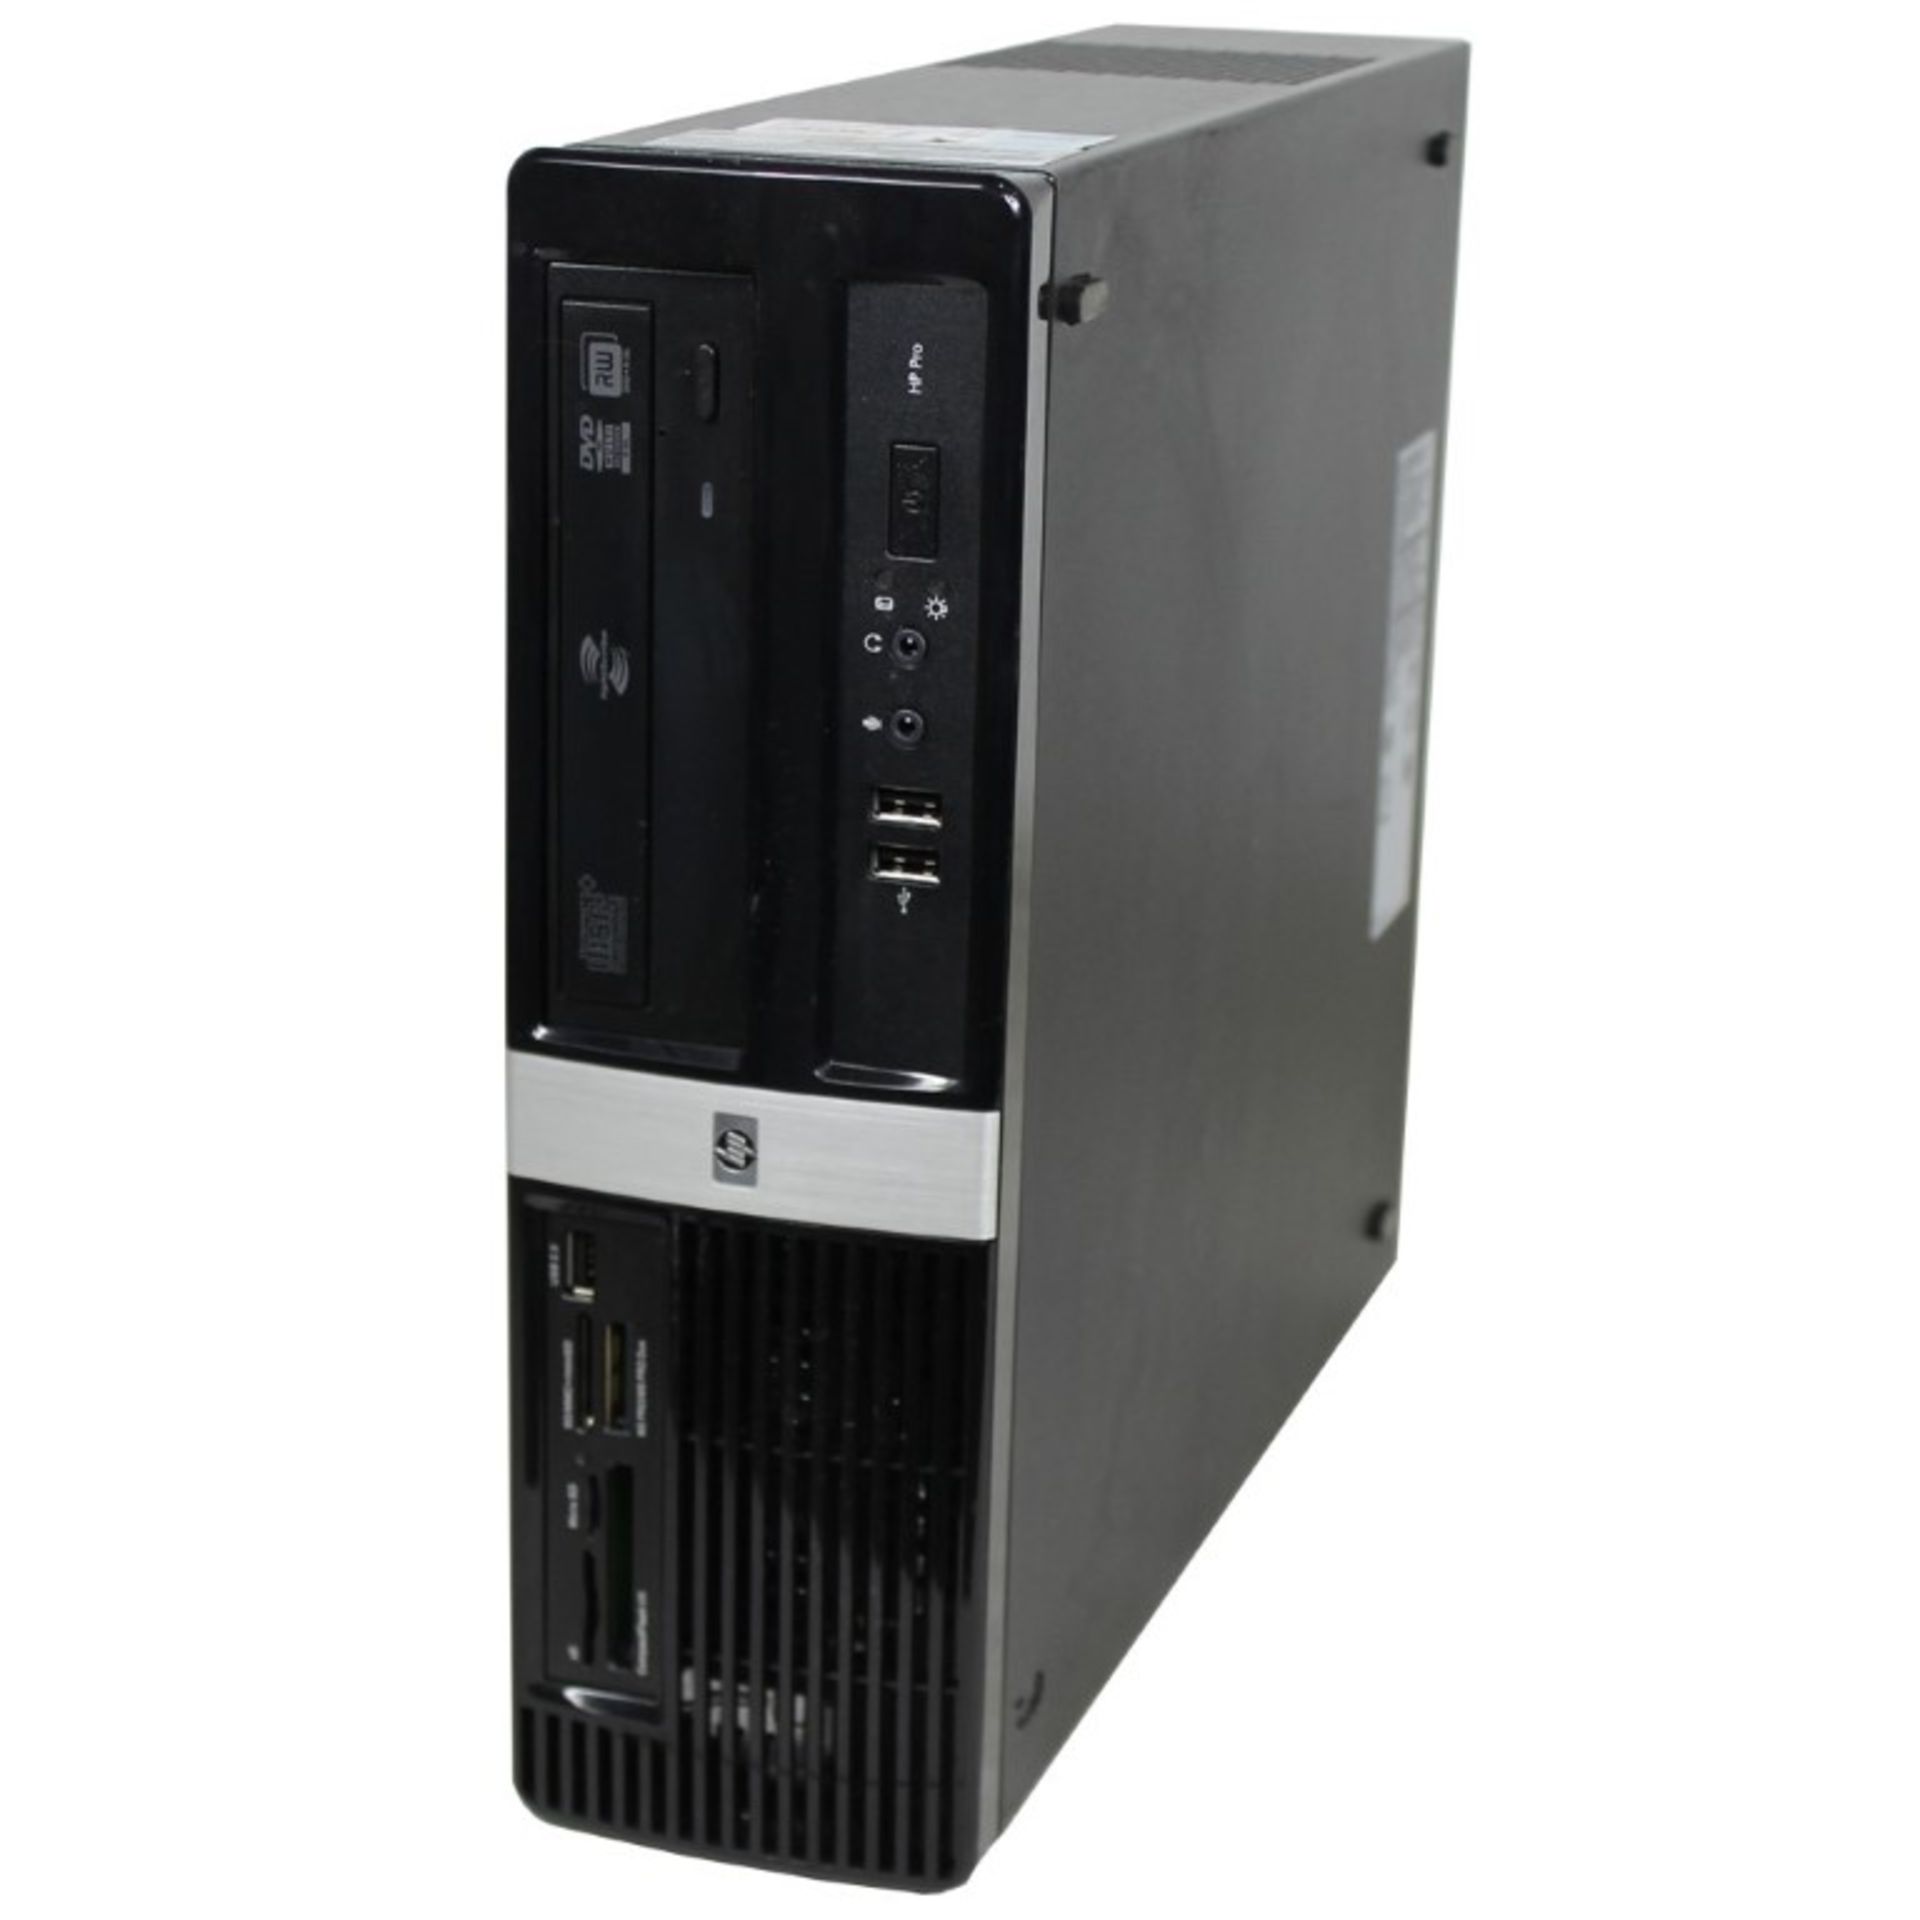 1 x HP Pro 3010 Small Form Factor PC - Features Intel Core 2 Duo 2.9ghz Processor, 4gb DDR3 Ram,